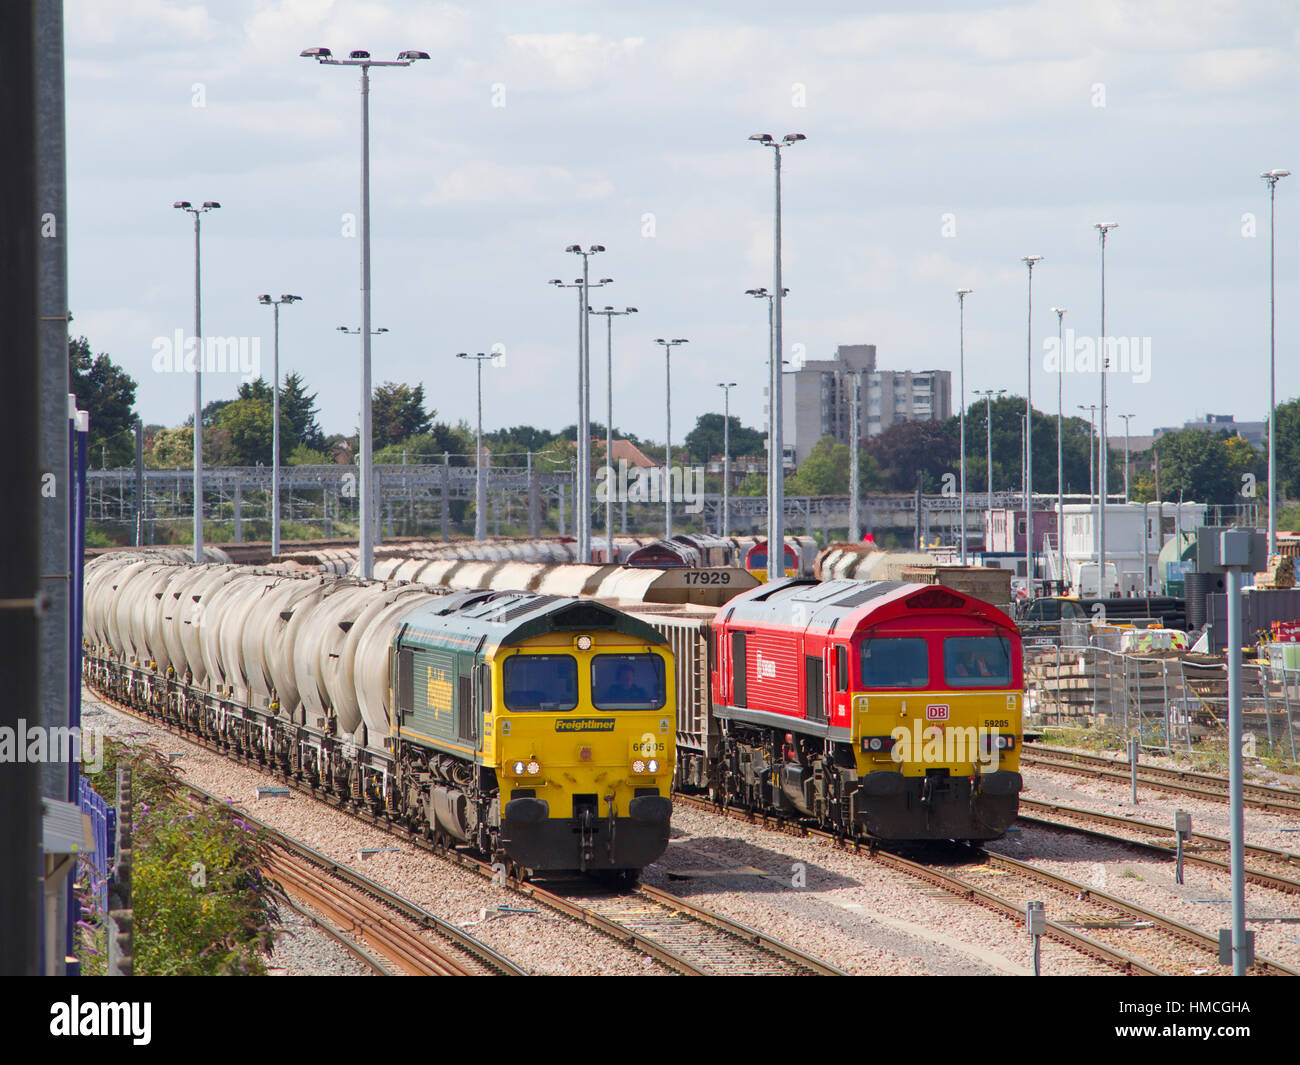 A Freightliner class 66 locomotive and a DB Schenker class 59 locomotive side by side in Acton yard, West London 17th August 2015. Stock Photo